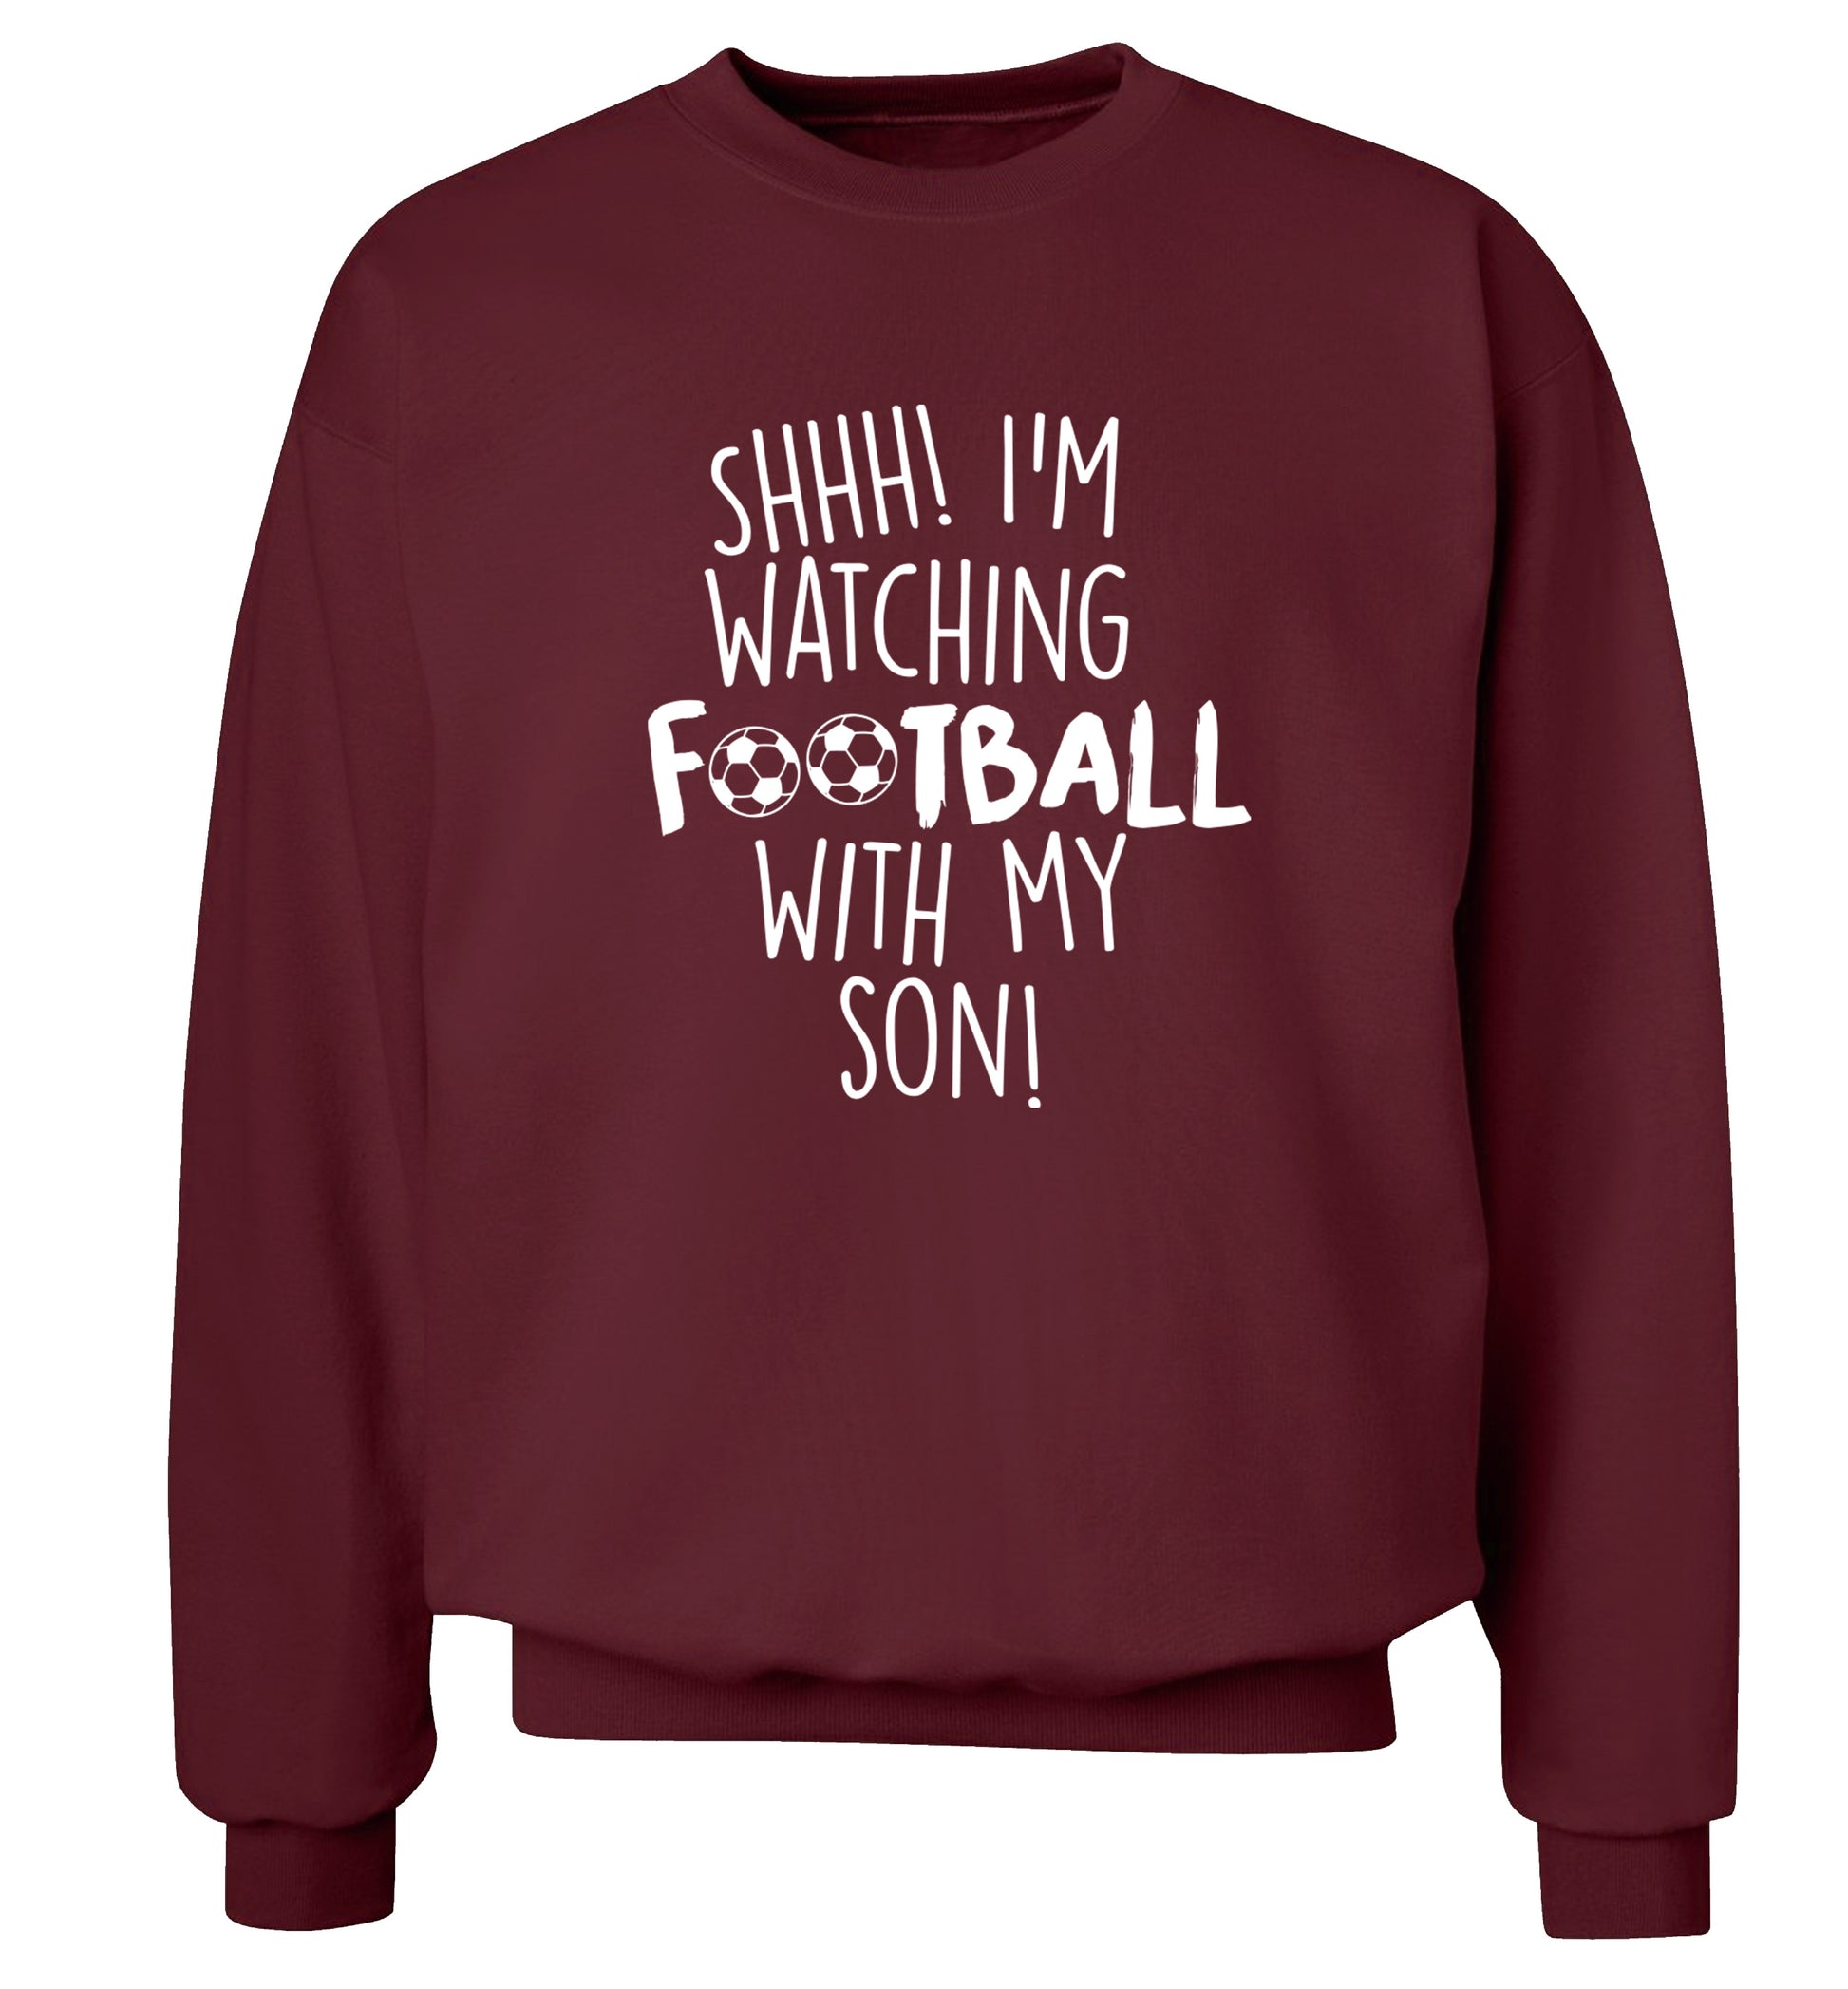 Shhh I'm watching football with my son Adult's unisexmaroon Sweater 2XL